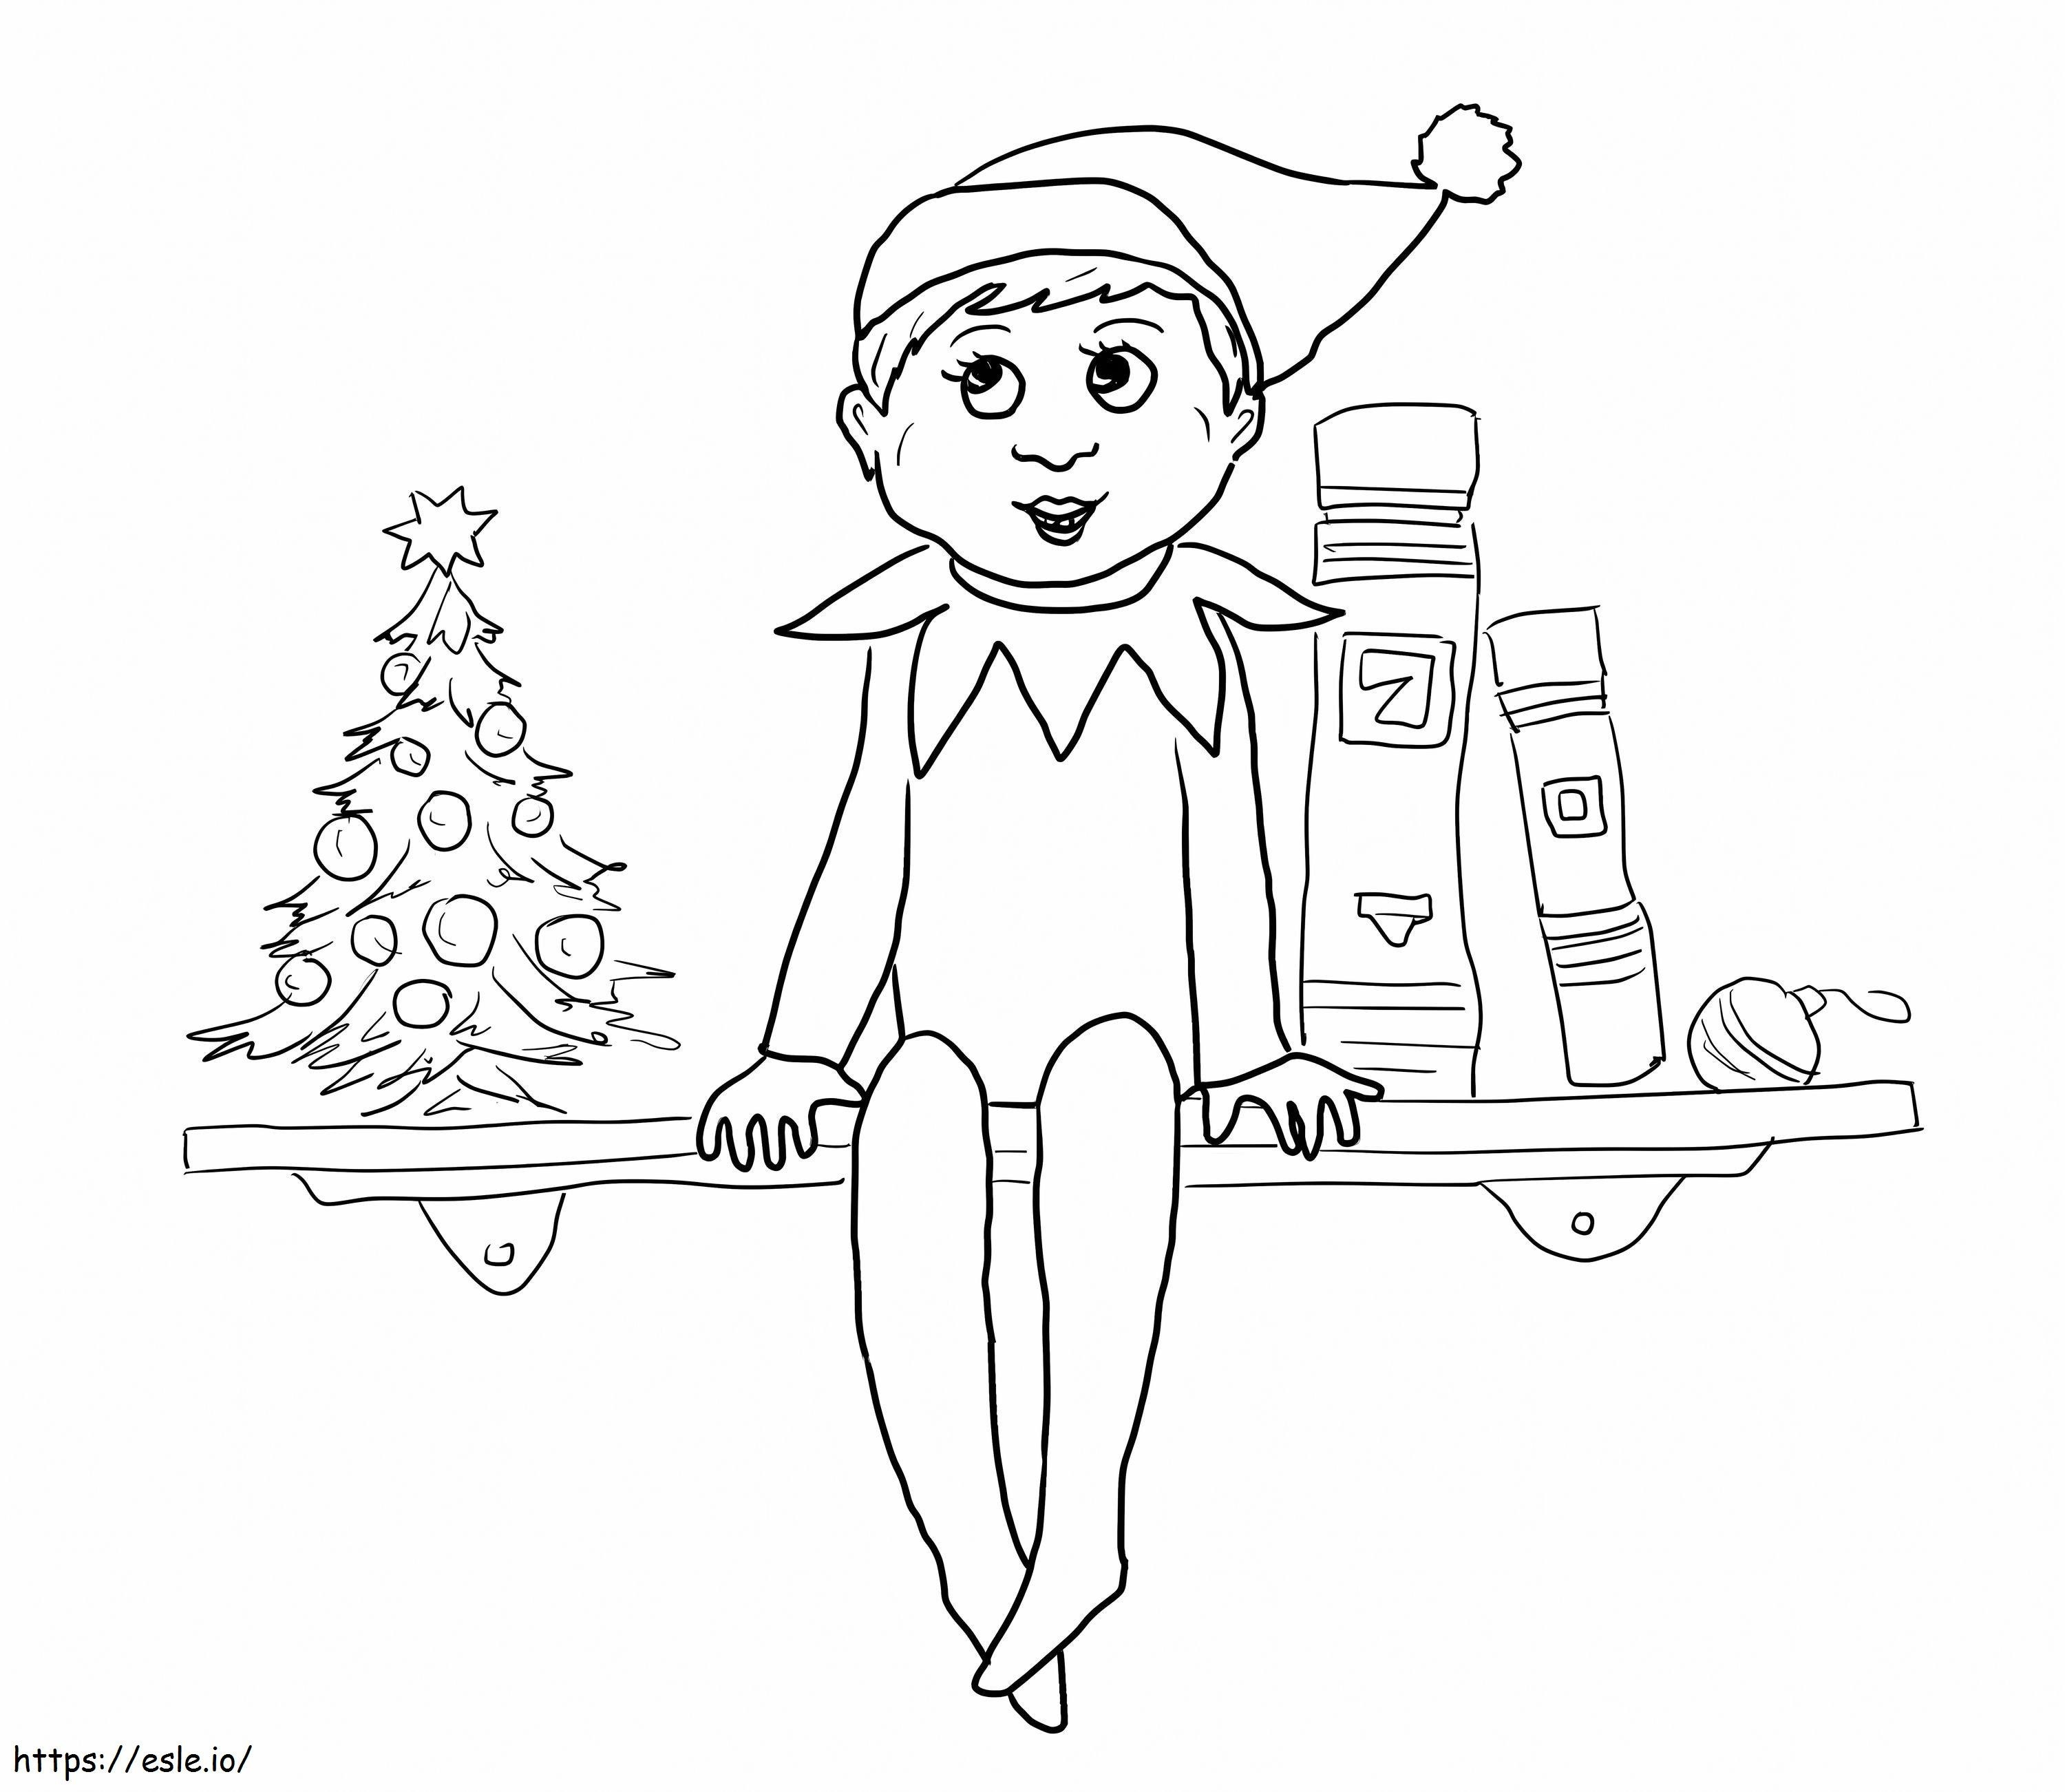 Happy Elf On The Shelf coloring page